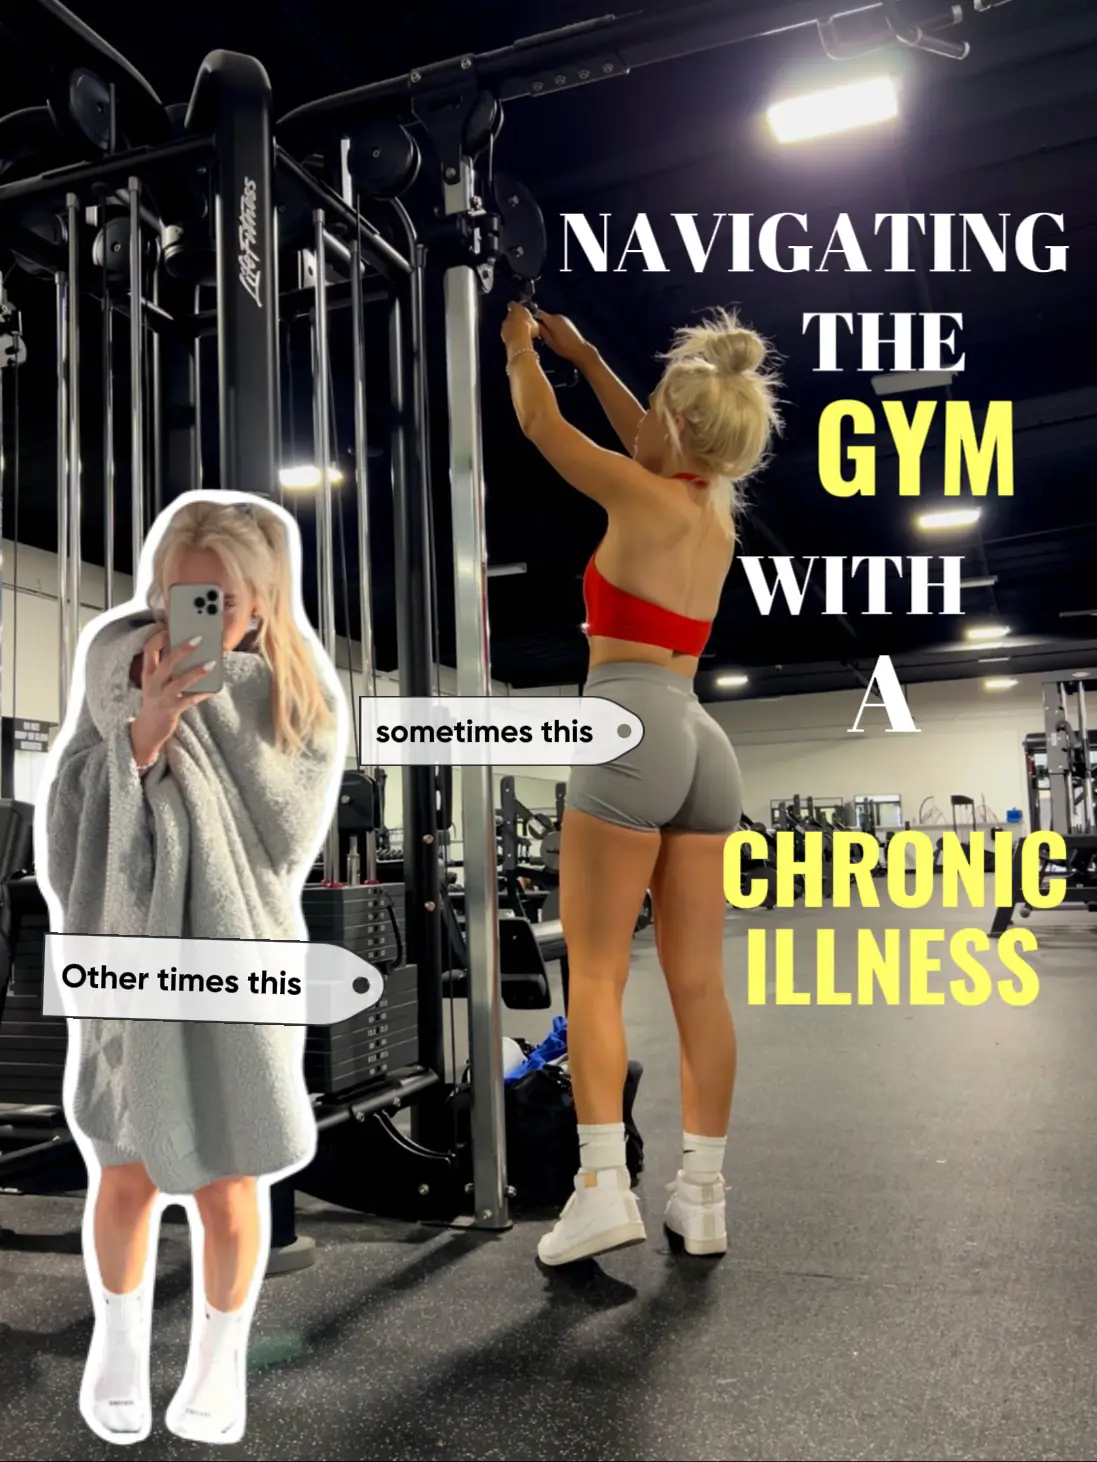 How to Begin Working Out With a Chronic Illness